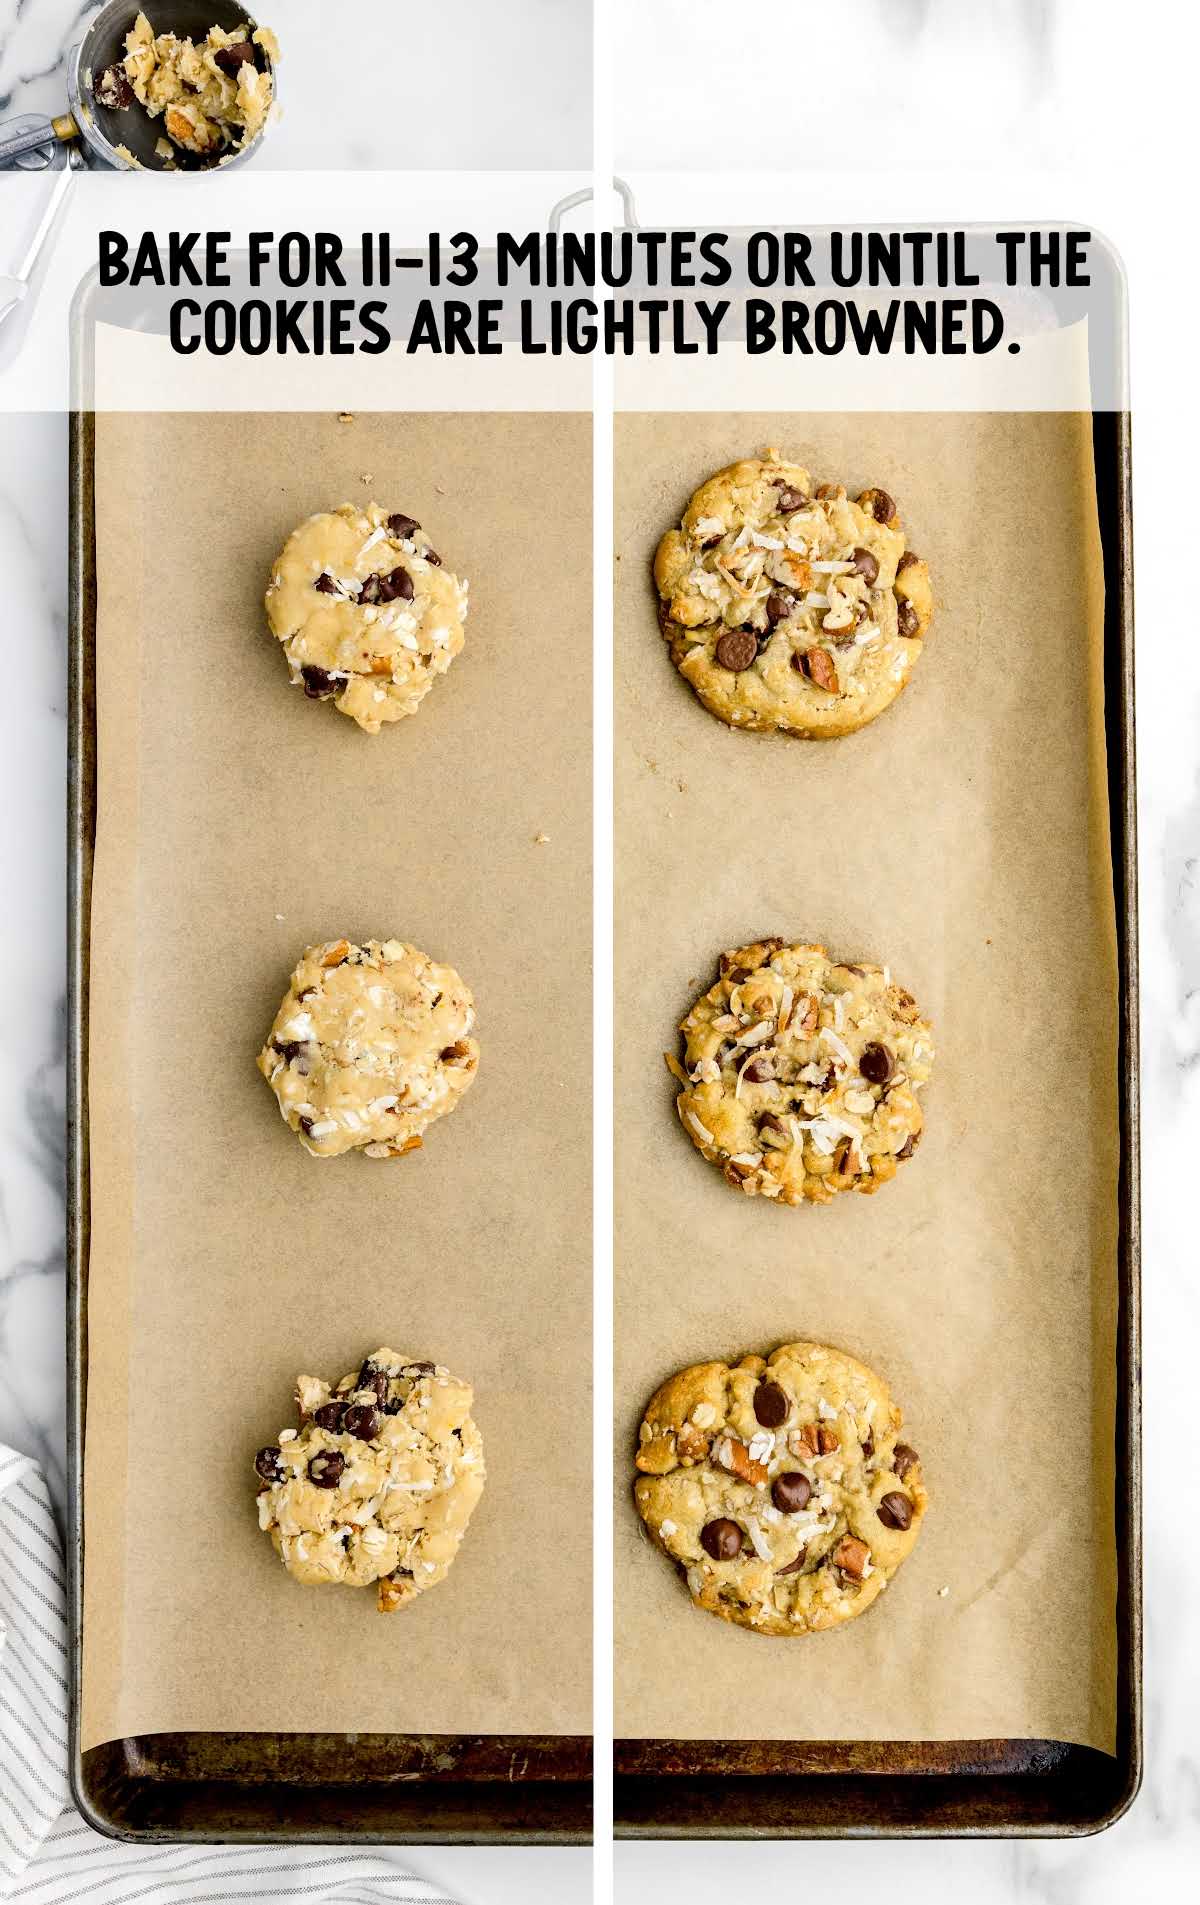 bake cookies for 11 to 13 minutes